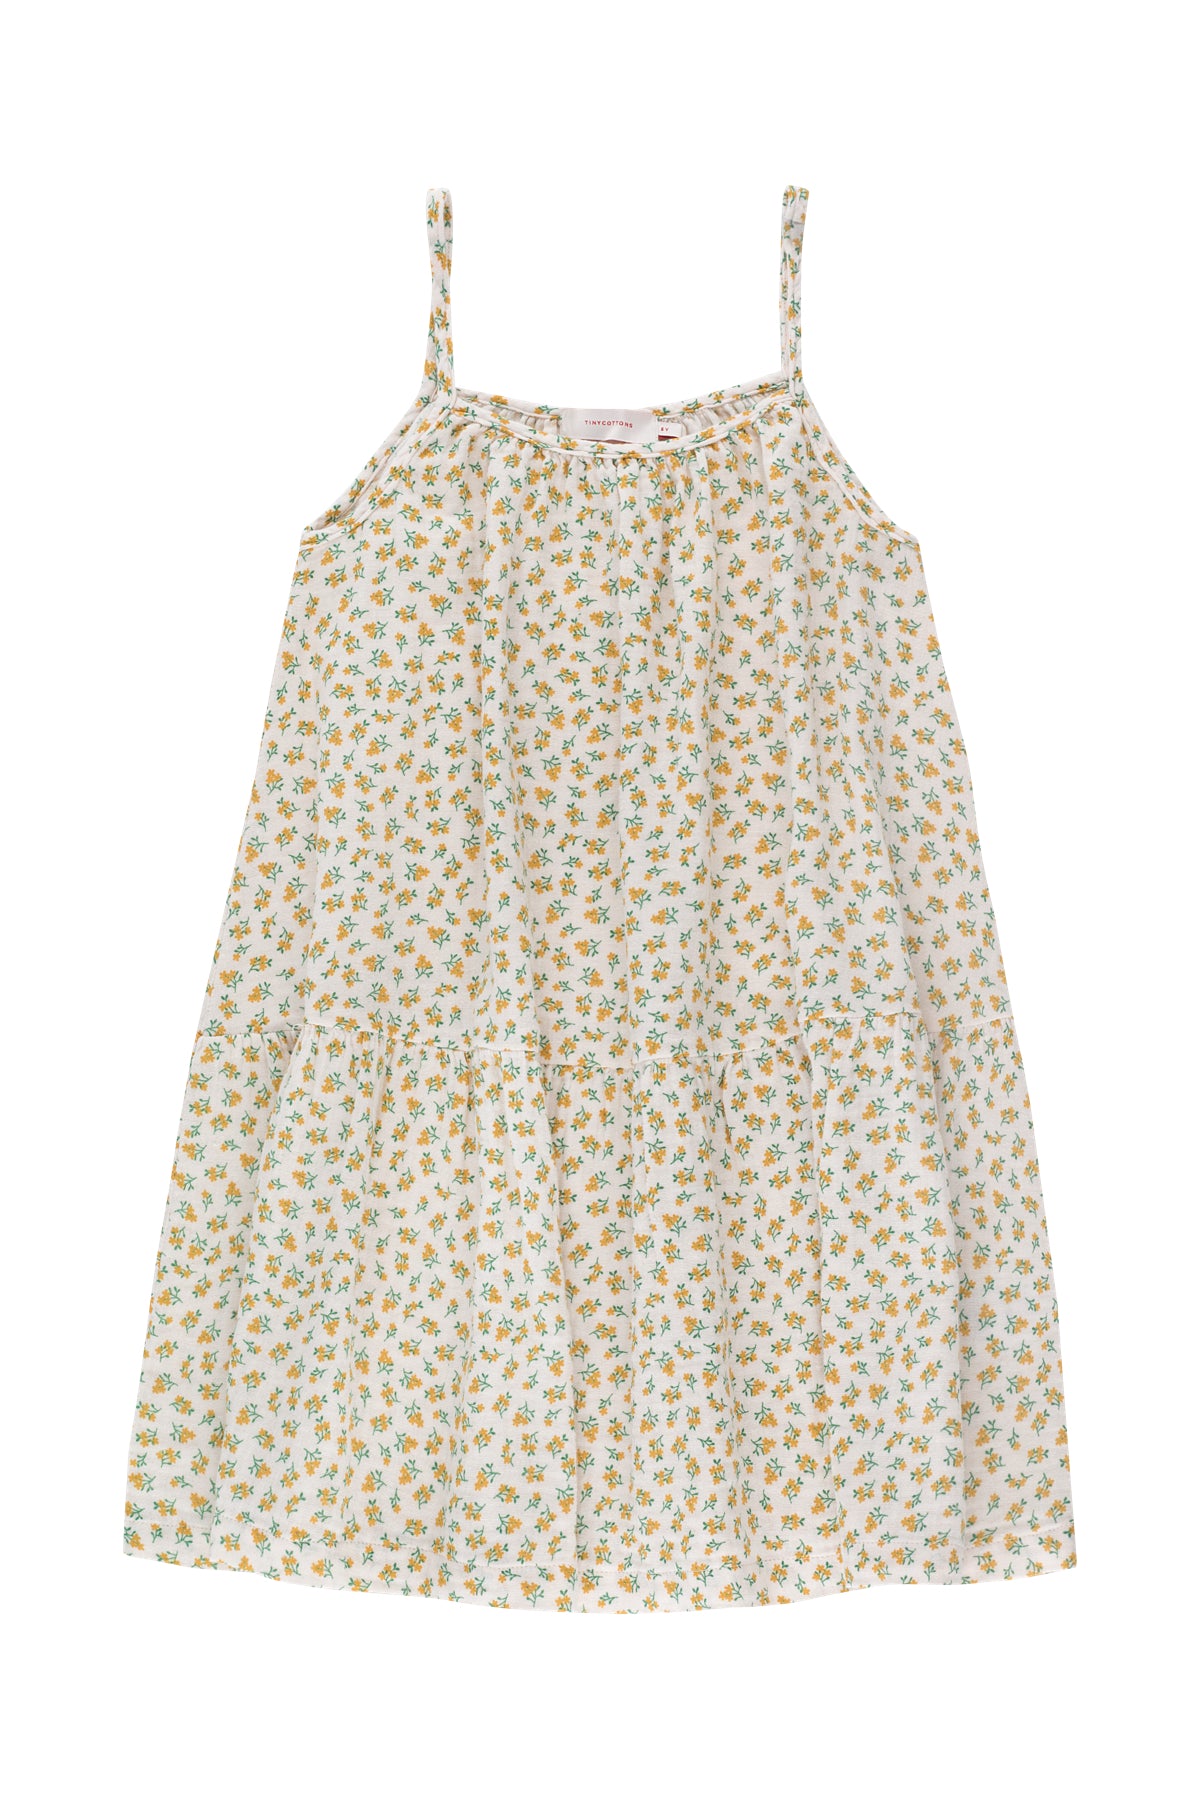 Tiny Cottons Small Flowers Dress - Pastel Pink/Honey